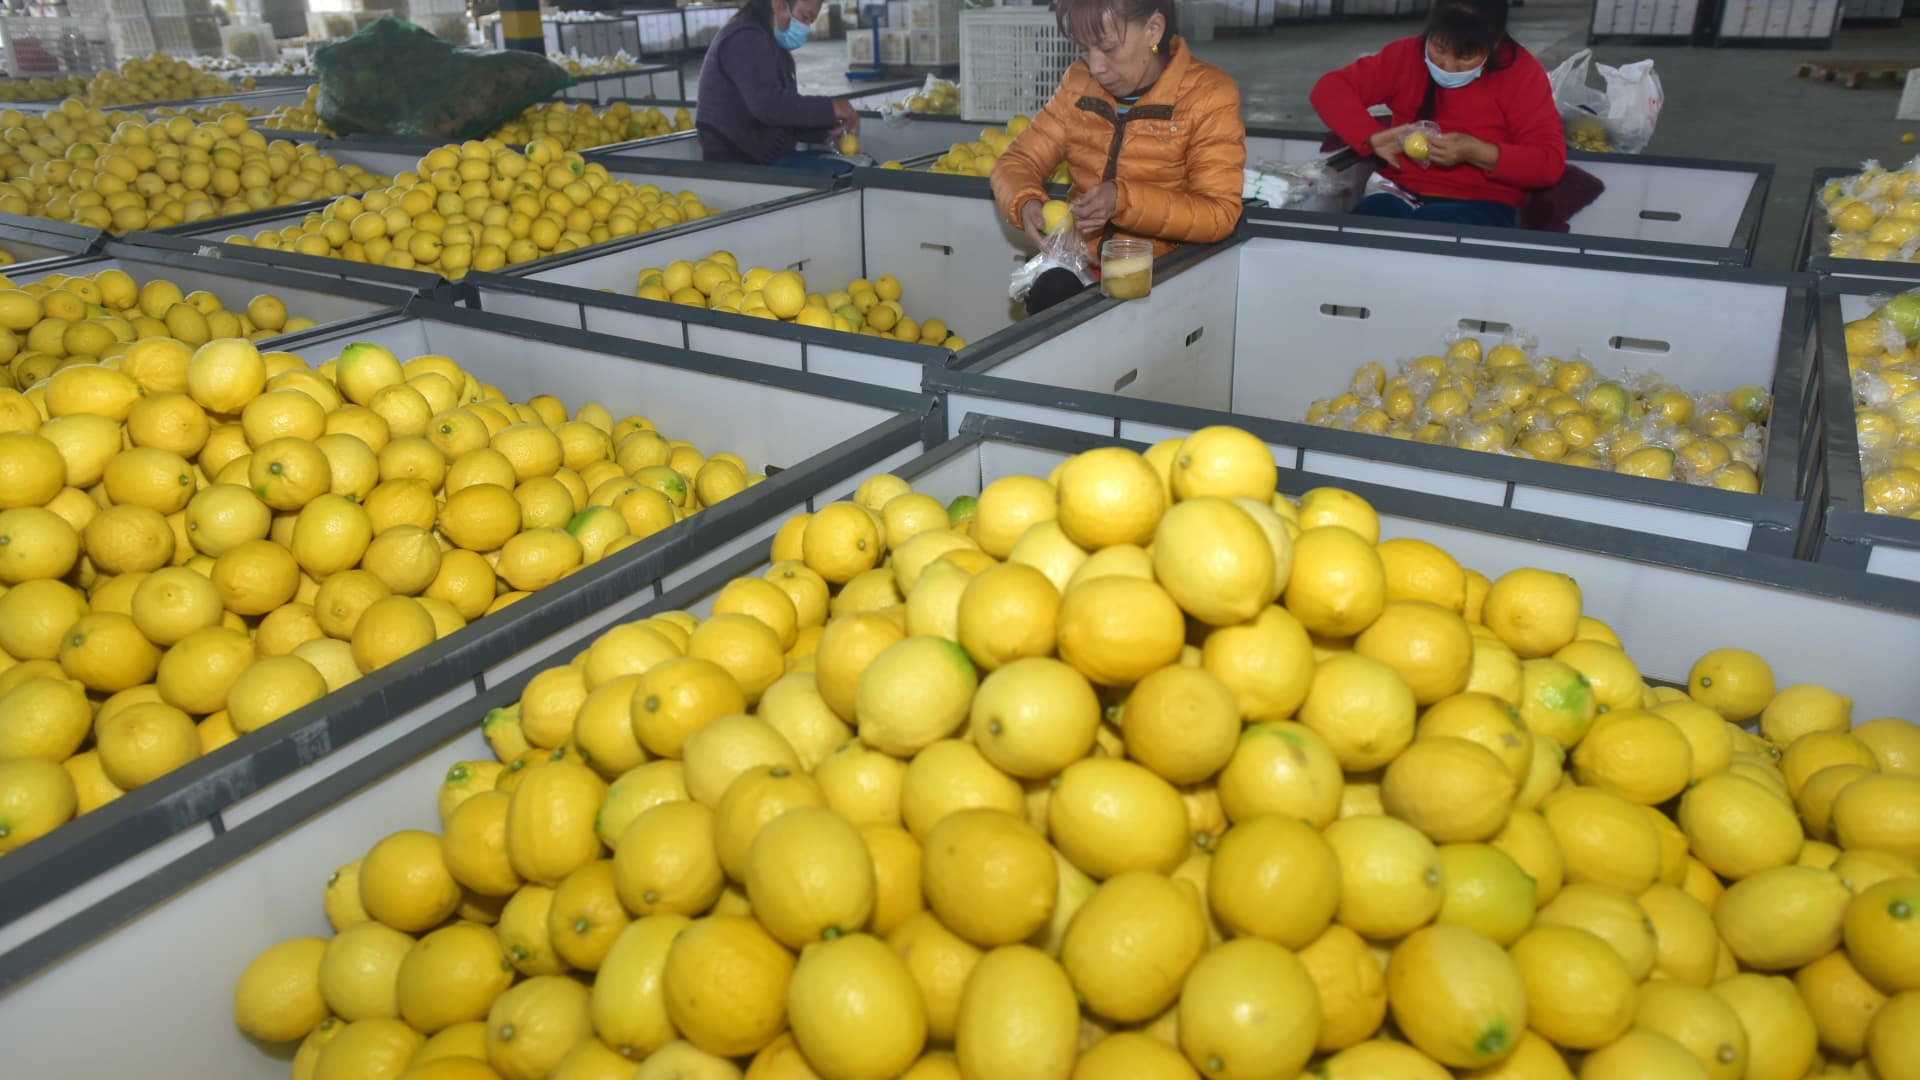 Lemons, peaches and TCM bought as protection from virus